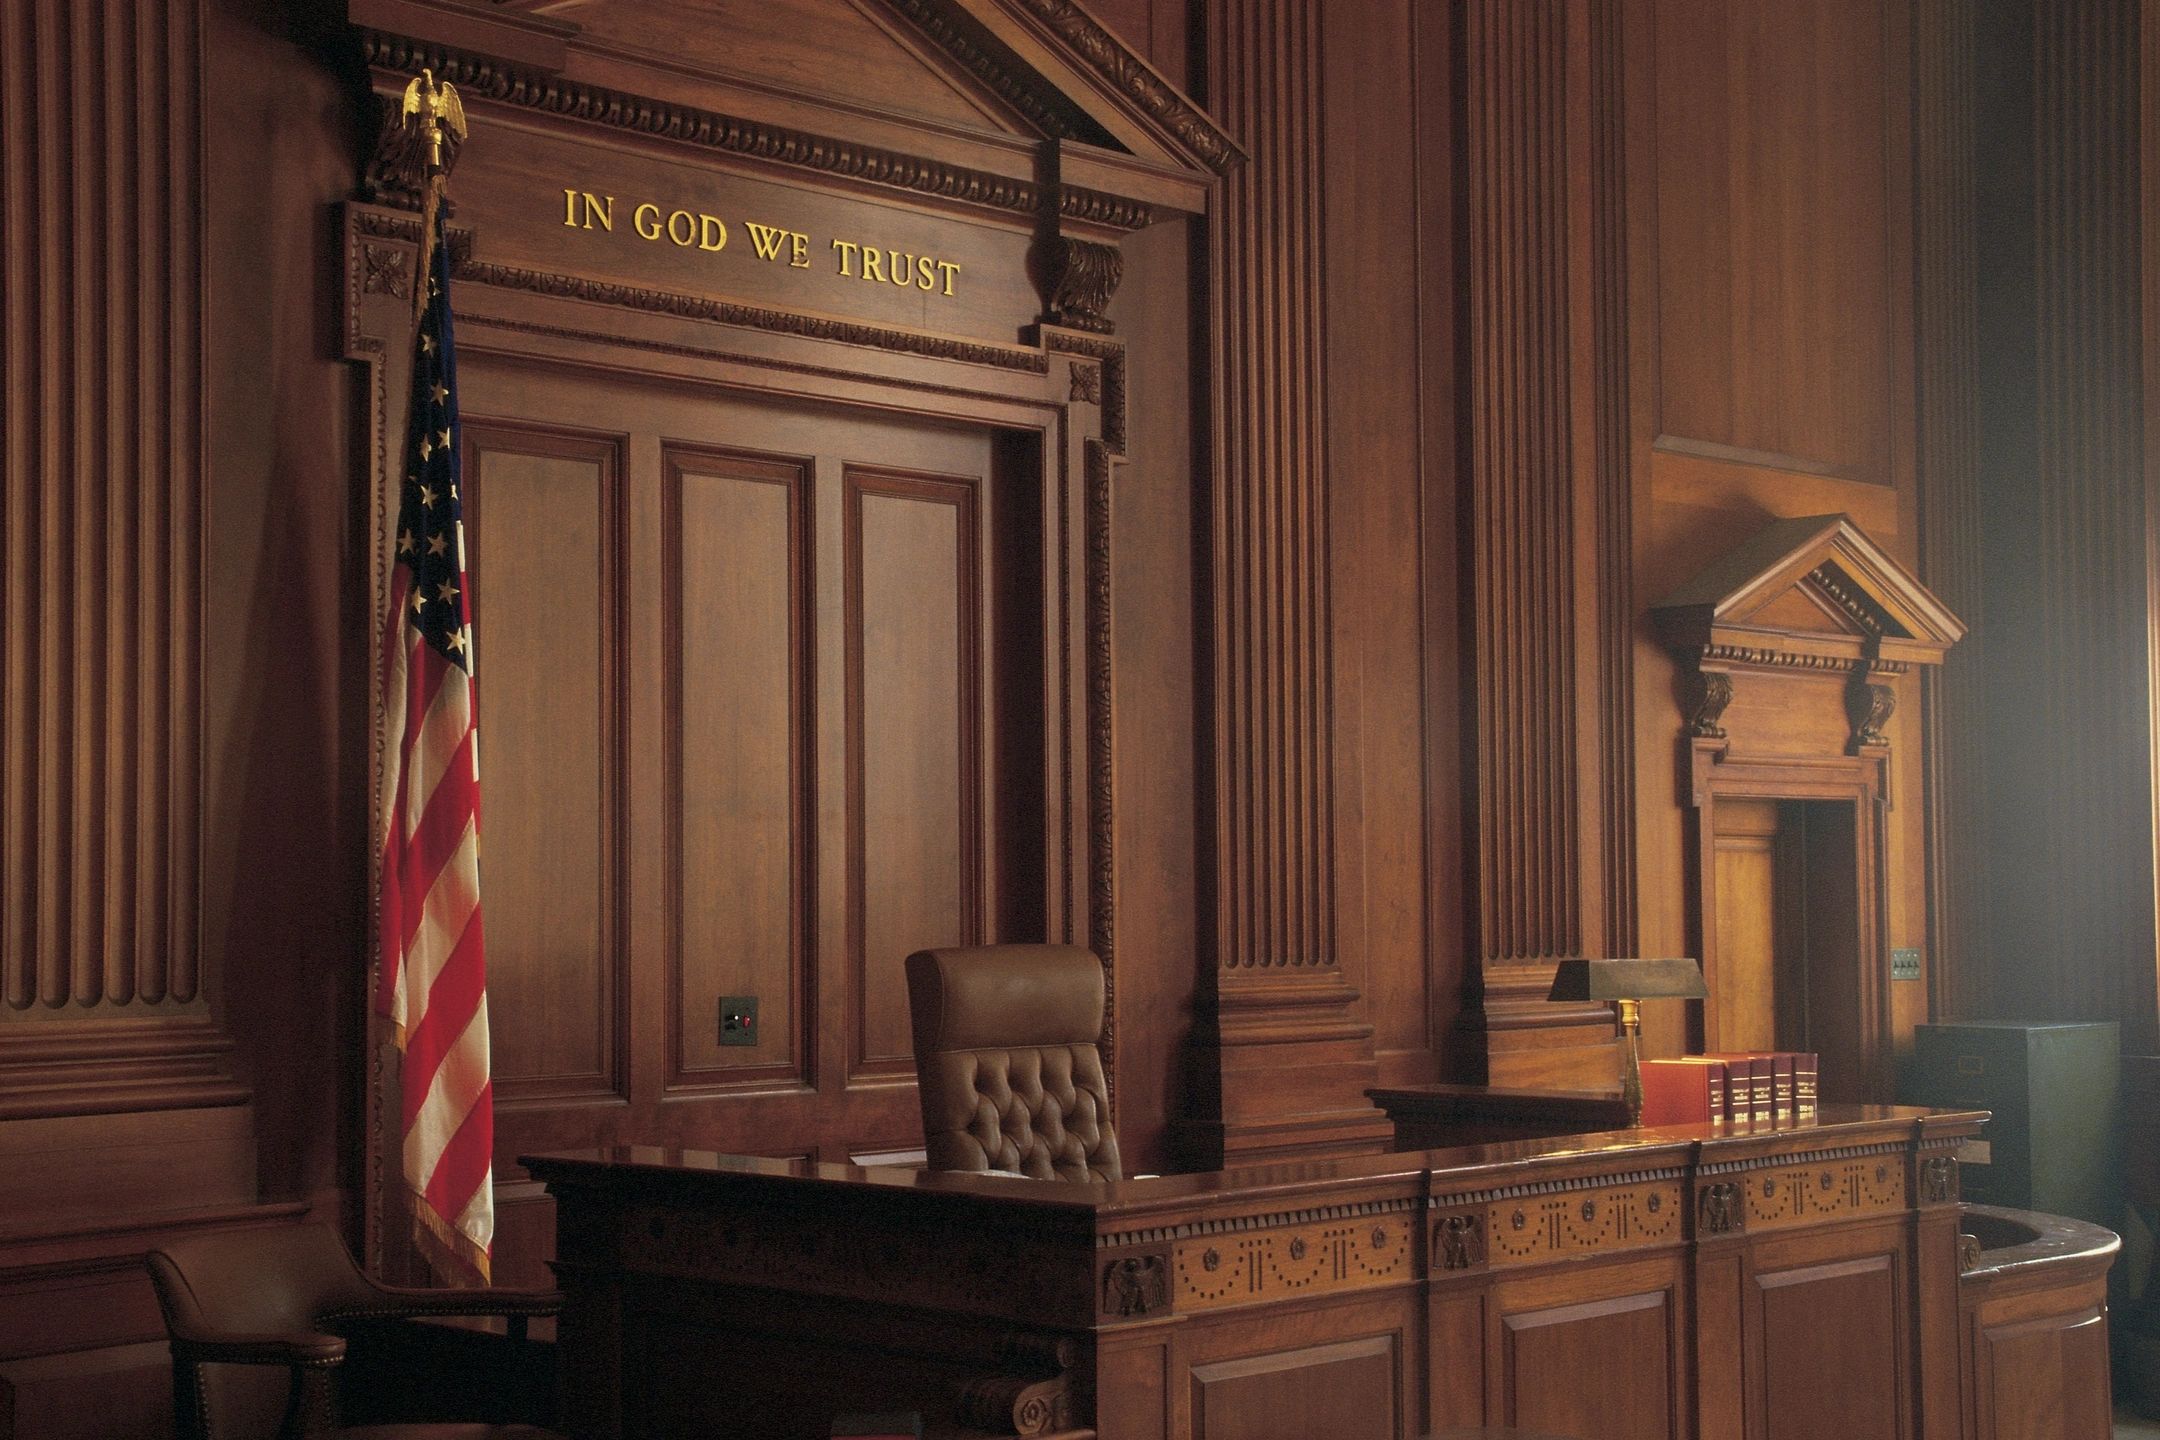 Image of courtroom